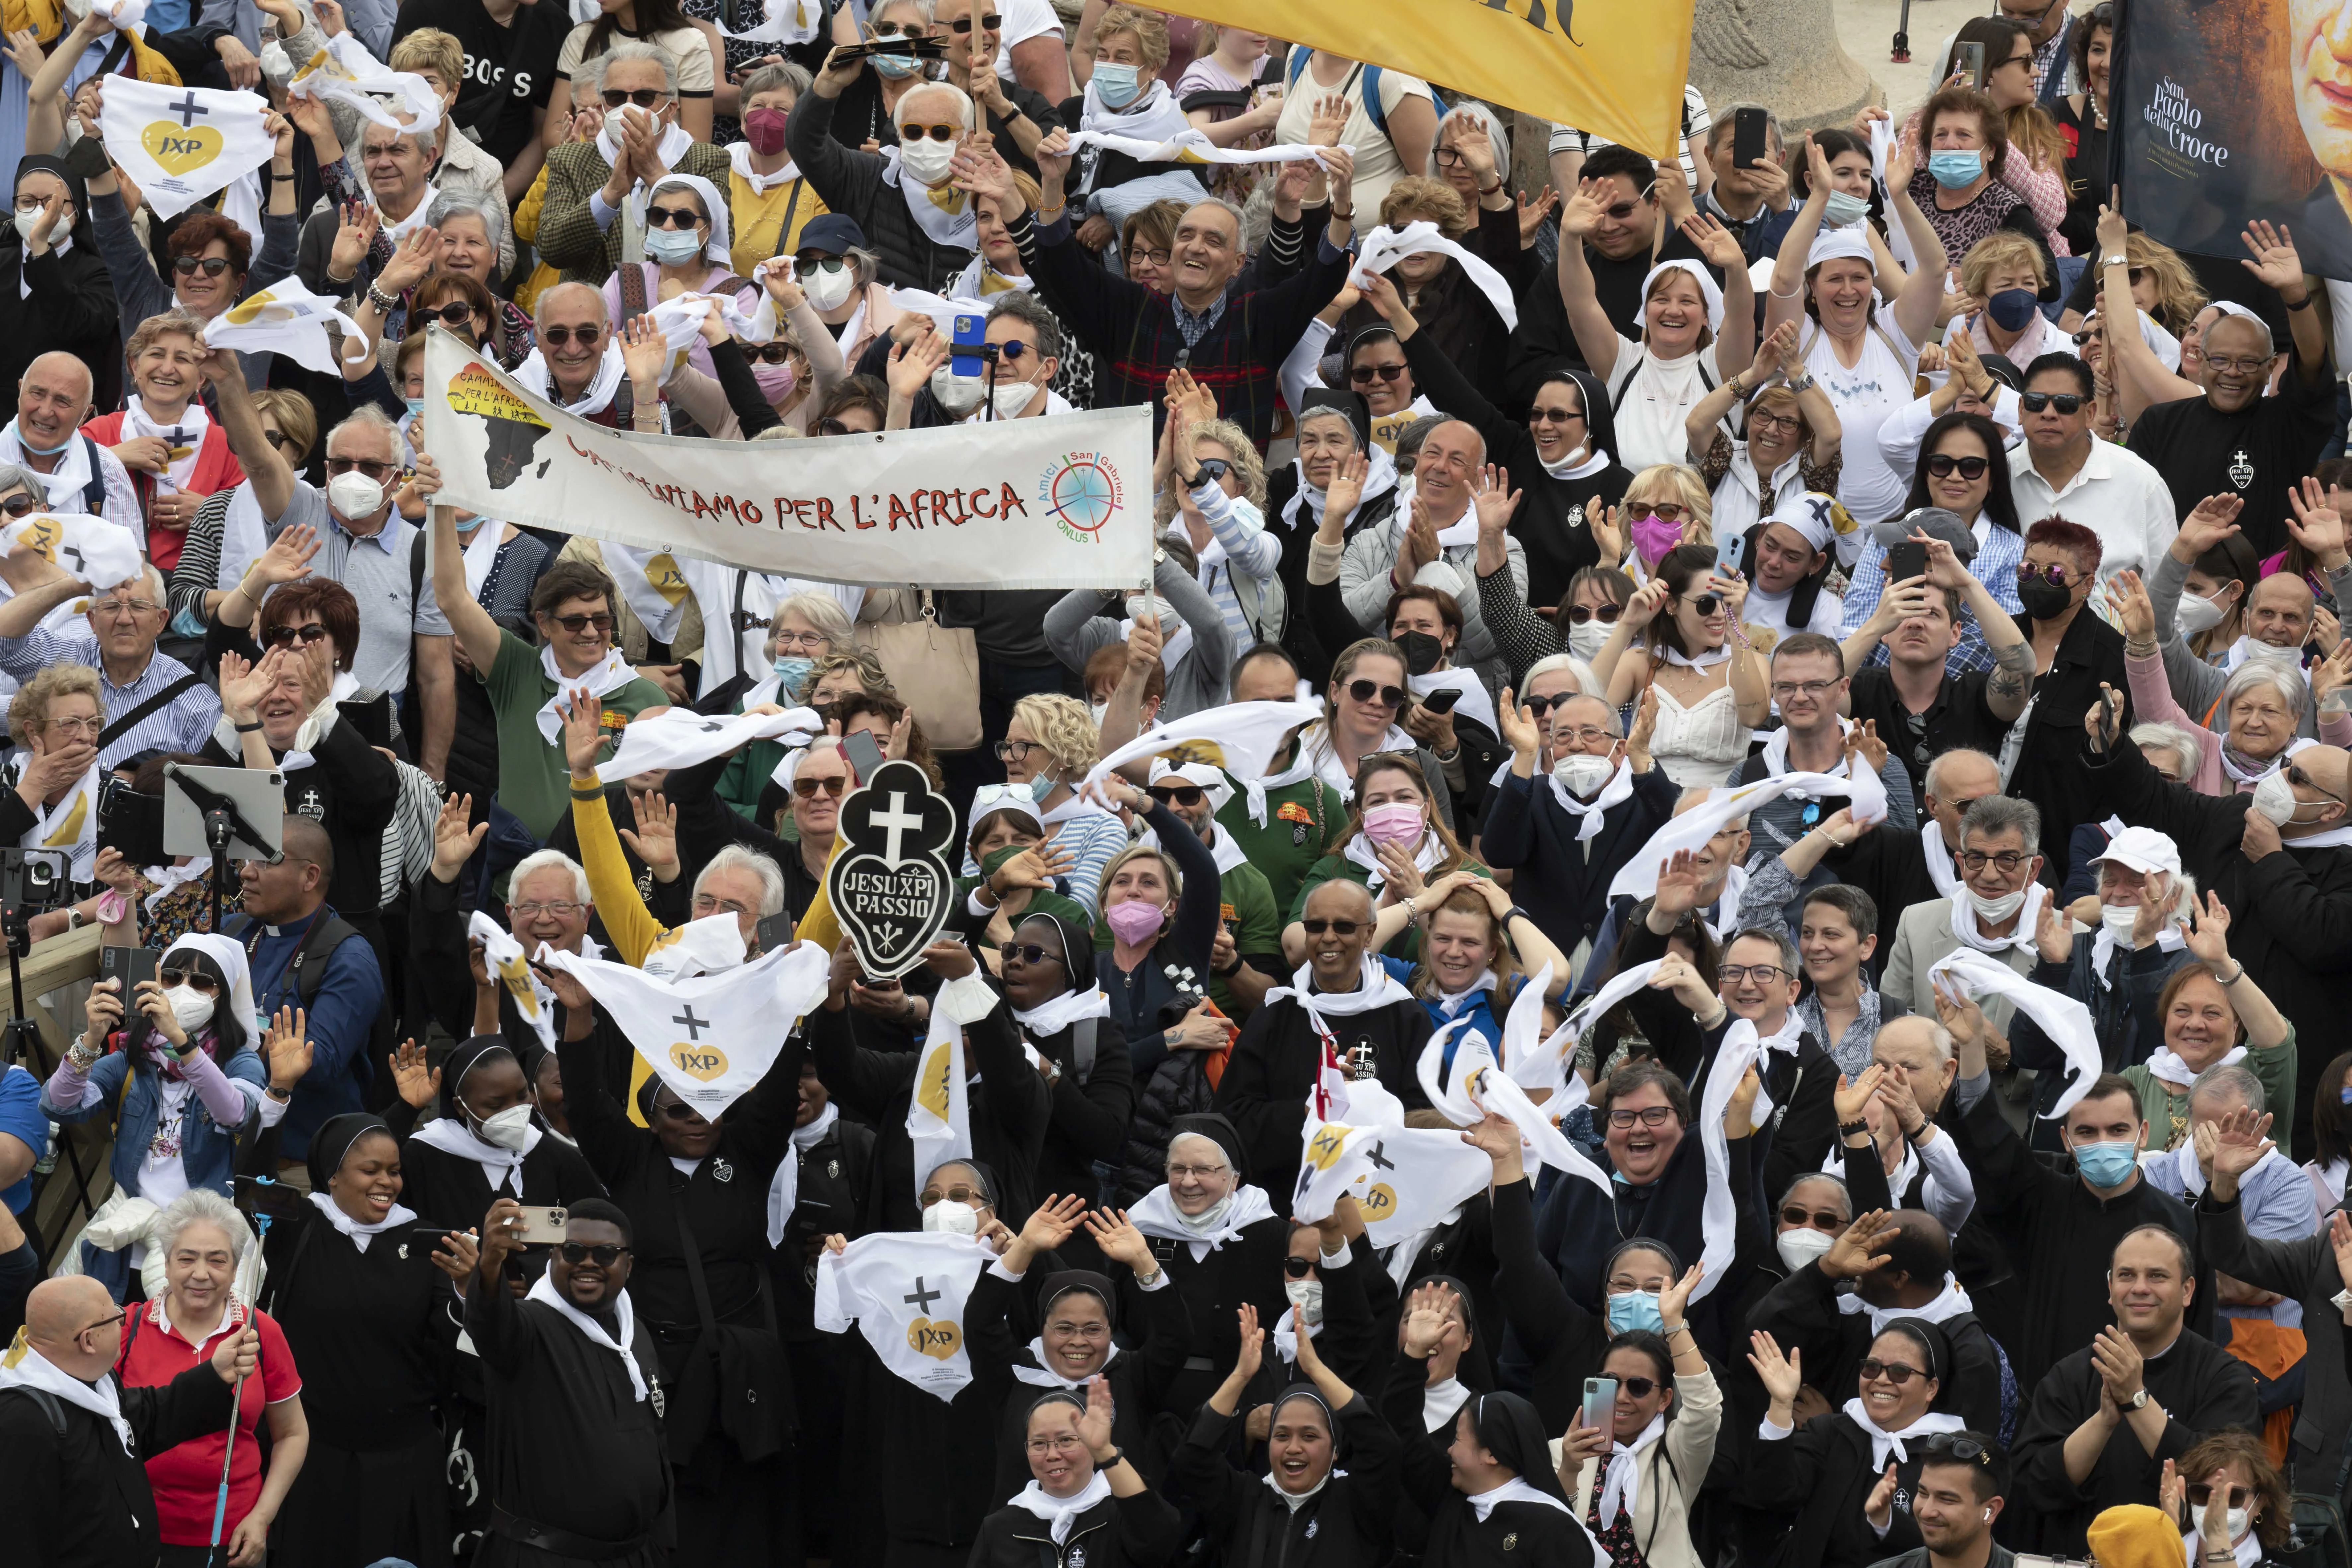 Pilgrims in St. Peter's Square on May 8, 2022. Vatican Media